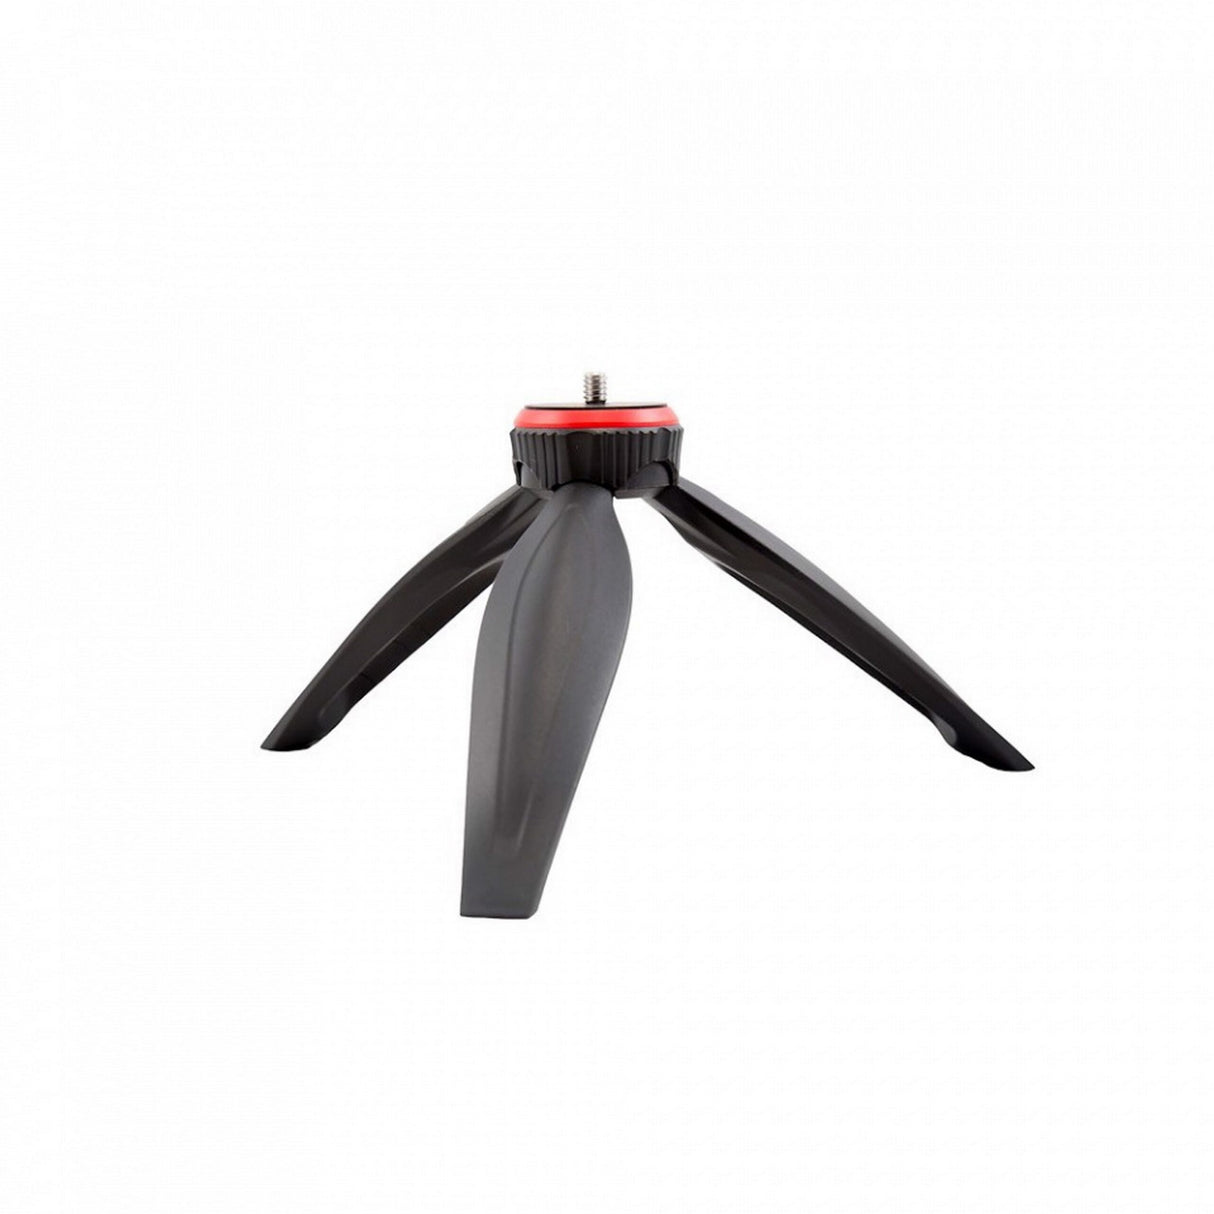 FeiyuTech FY A027 Table Tripod v2 for Gimbals